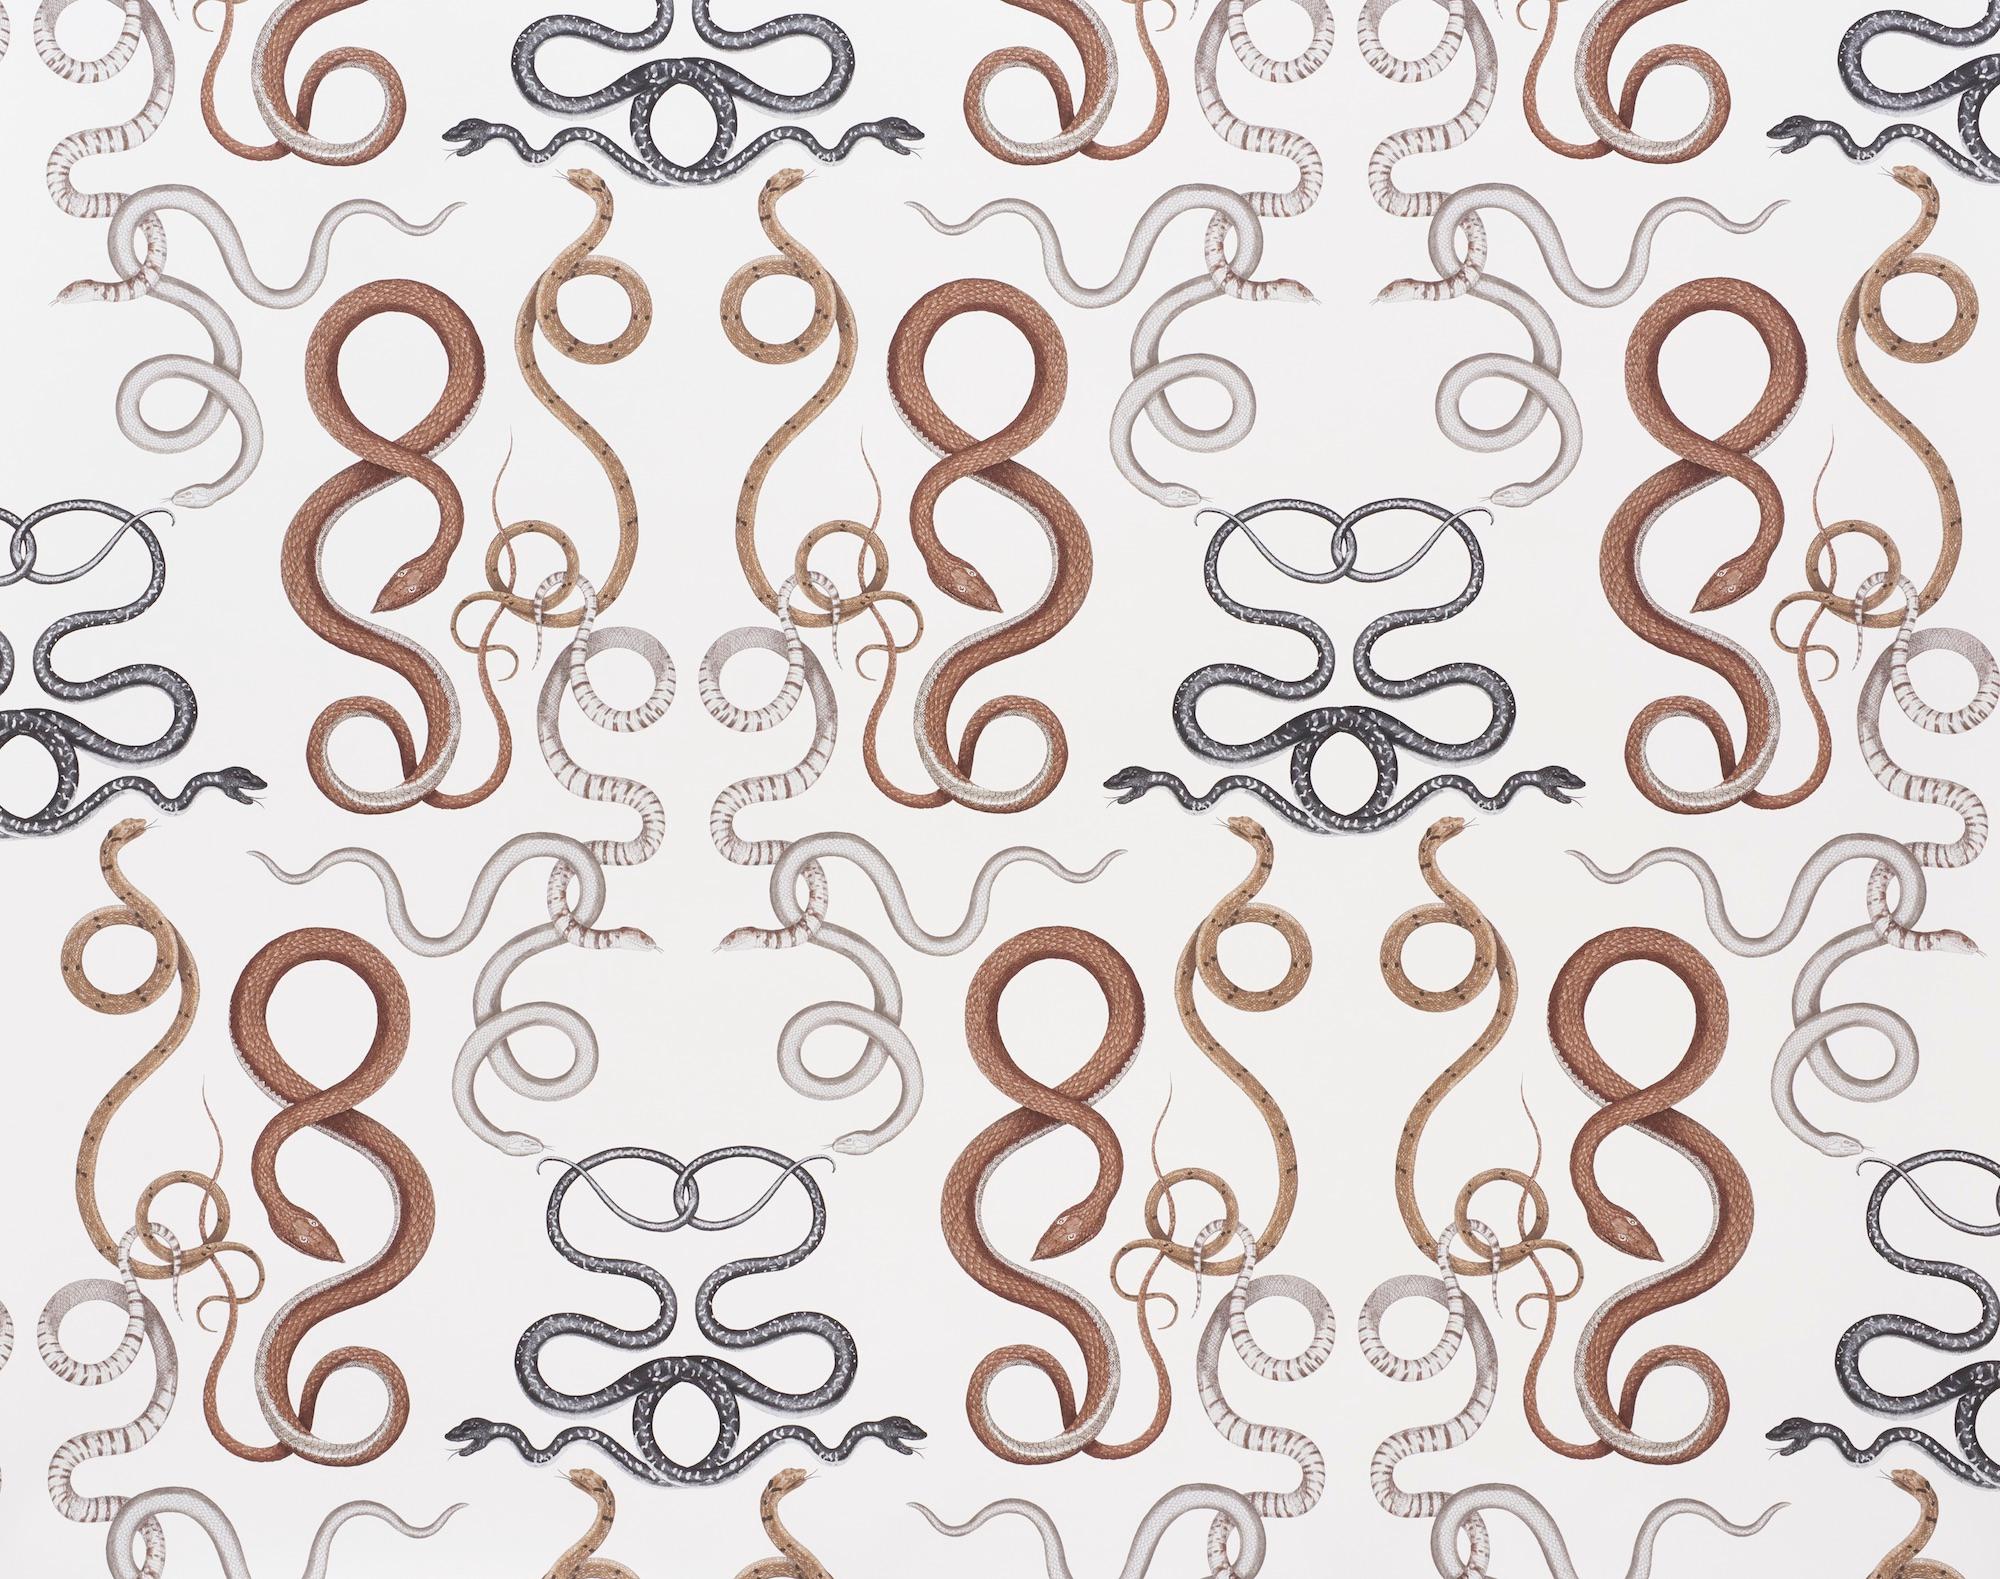 With its Cascade of hand-drawn, intertwining snakes, Giove invokes one of the oldest mythological symbols.

Since Schumacher was founded in 1889, our family-owned company has been synonymous with style, taste, and innovation. A passion for luxury